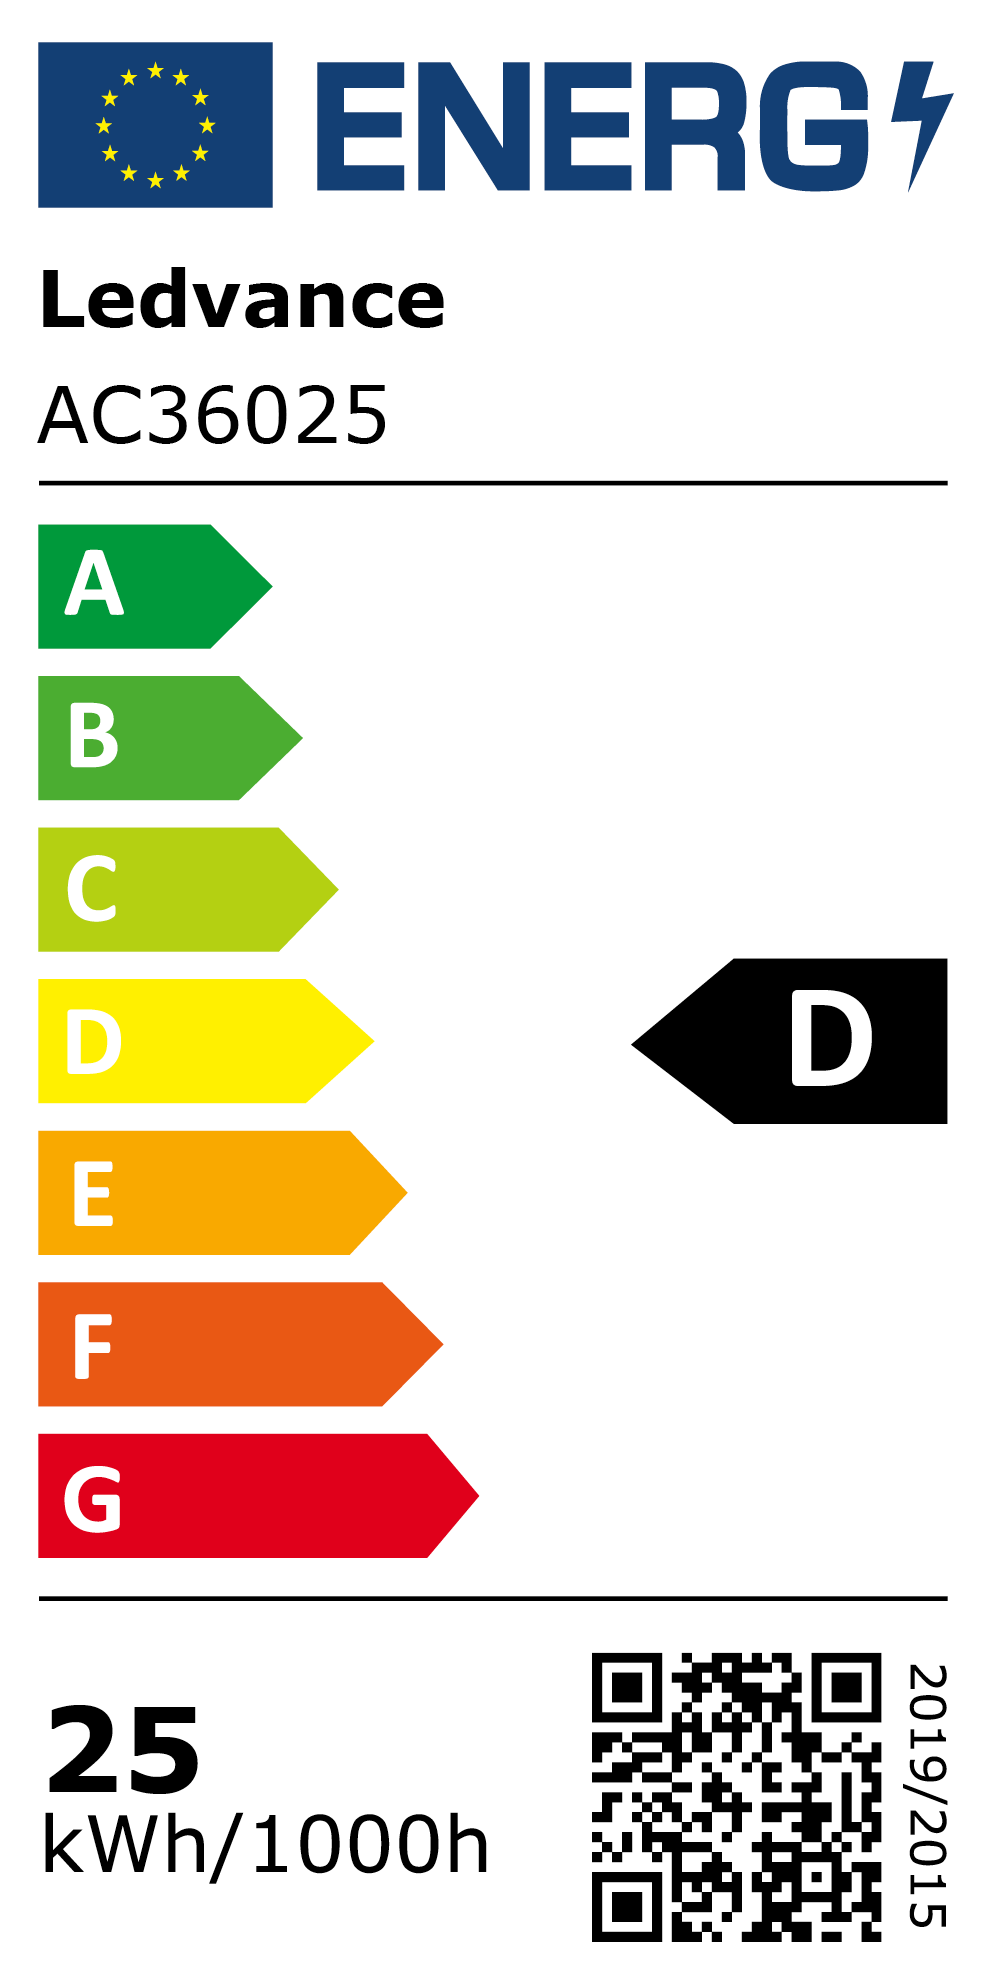 New 2021 Energy Rating Label: MPN AC36025